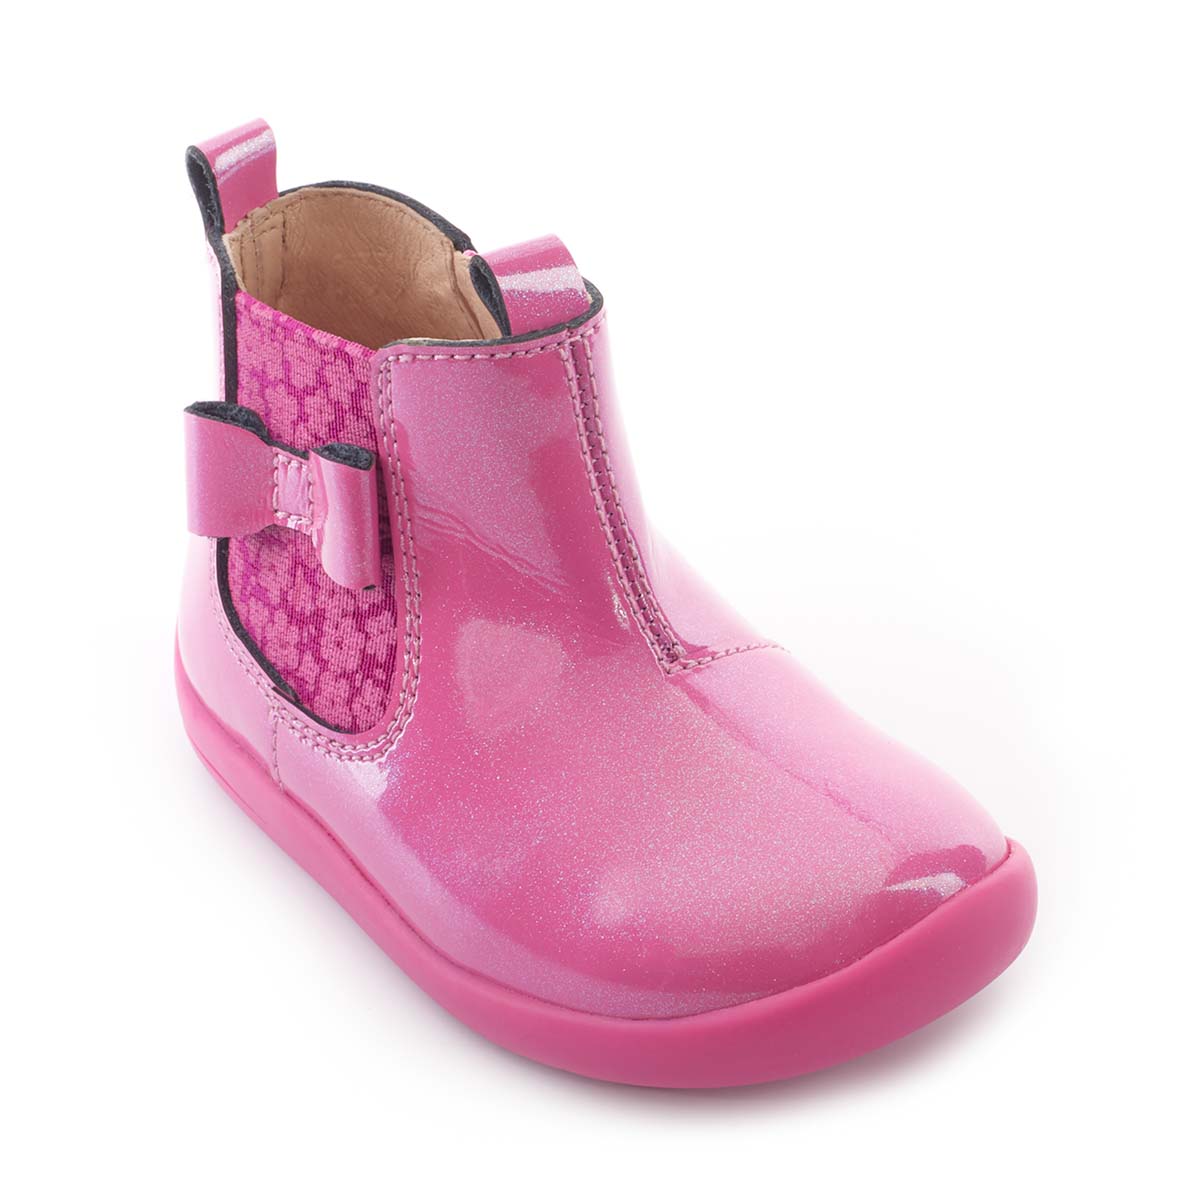 Start Rite - Wonderland Chelsea In Pink 0789-16F In Size 4.5 In Plain Pink Infant Girls Boots  In Pink For kids